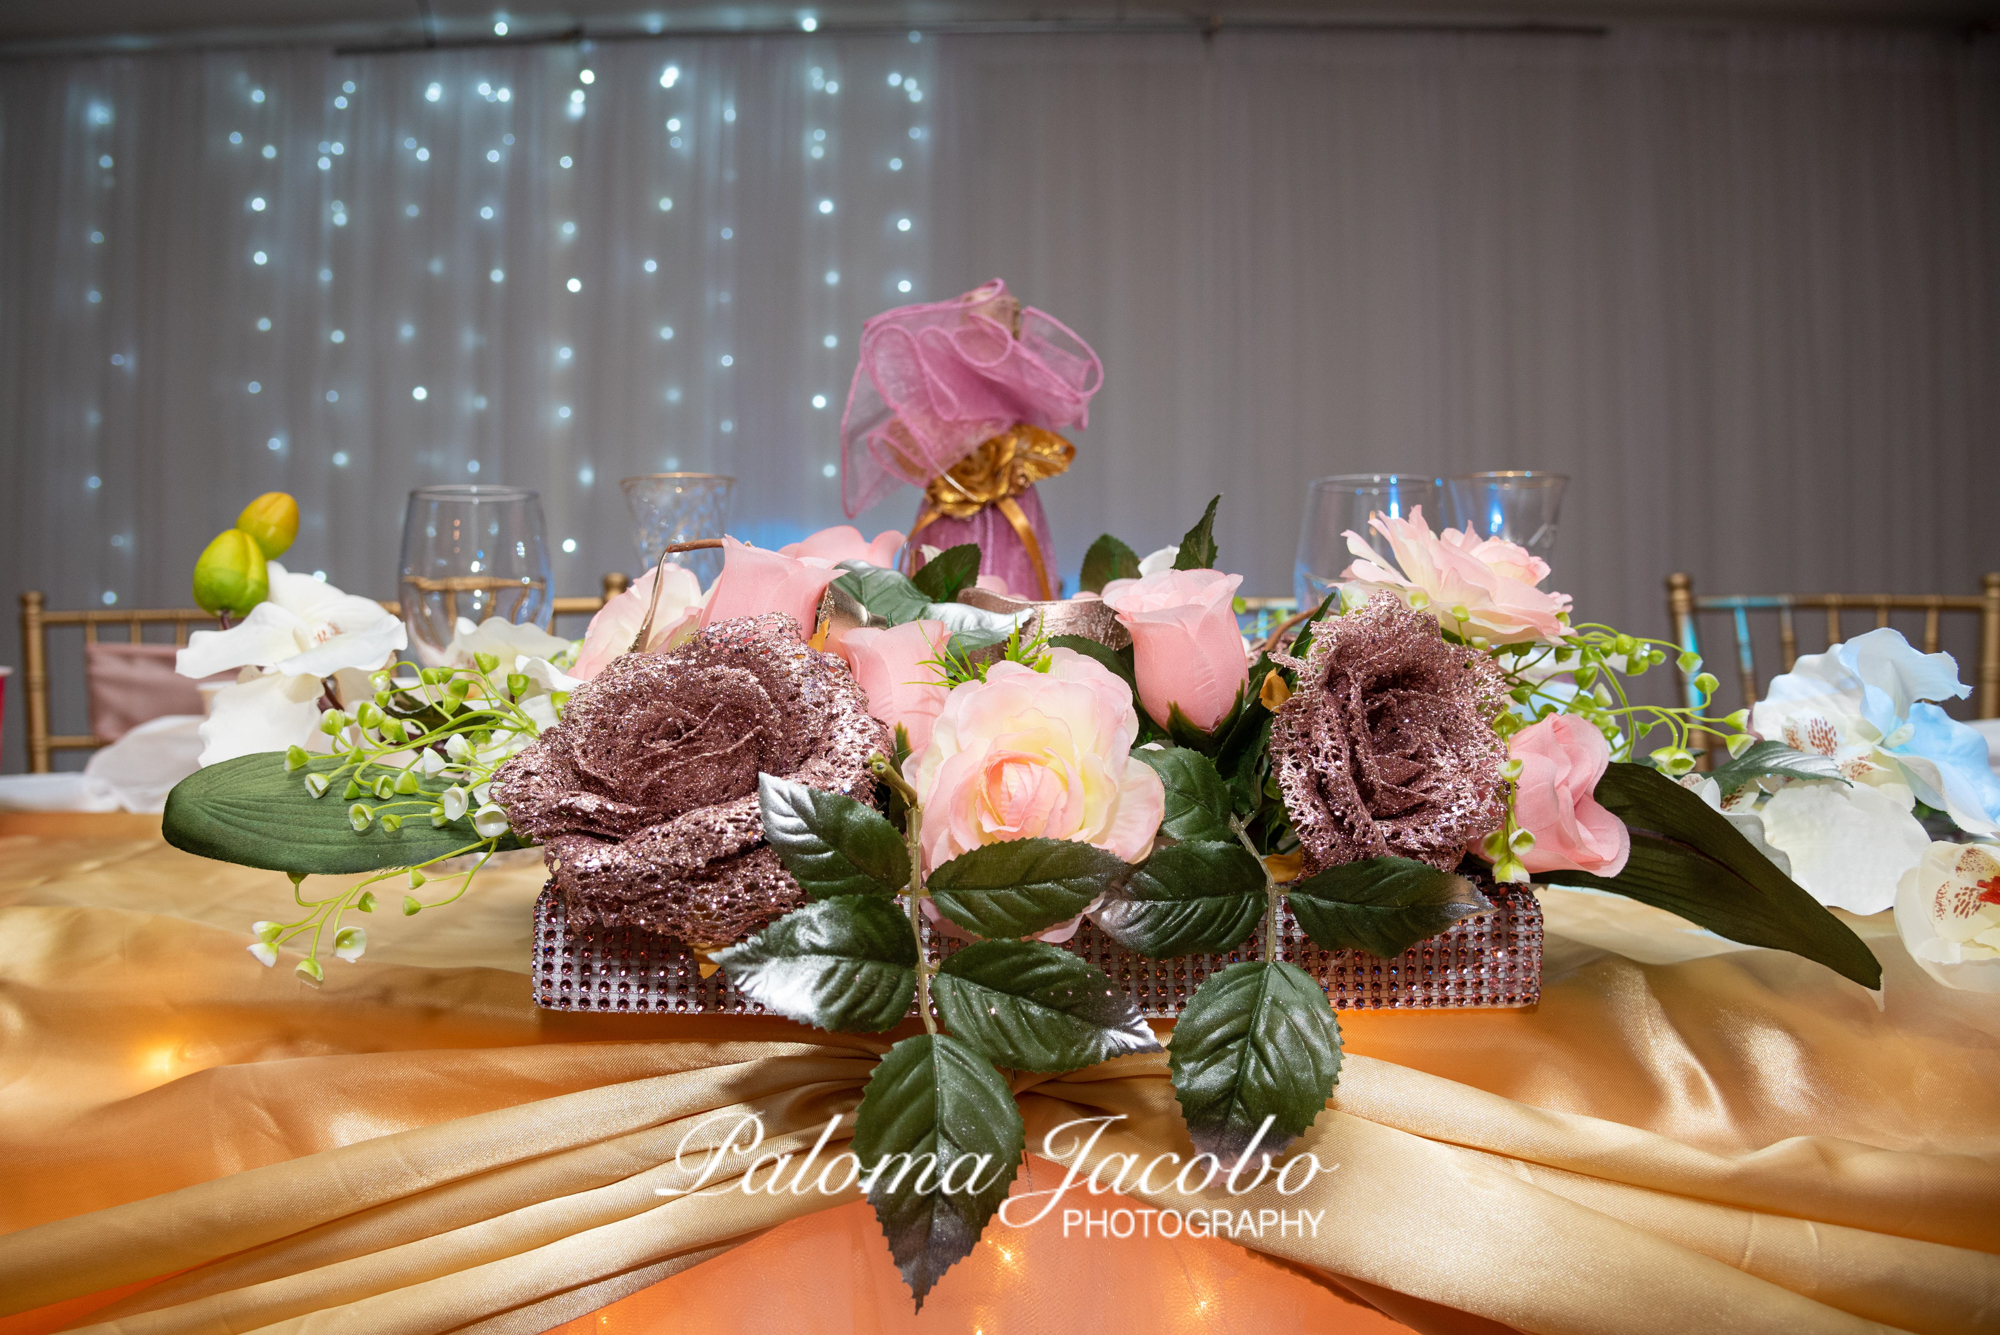 Main table decorations in blush pink and golden by Paloma Jacobo Photography